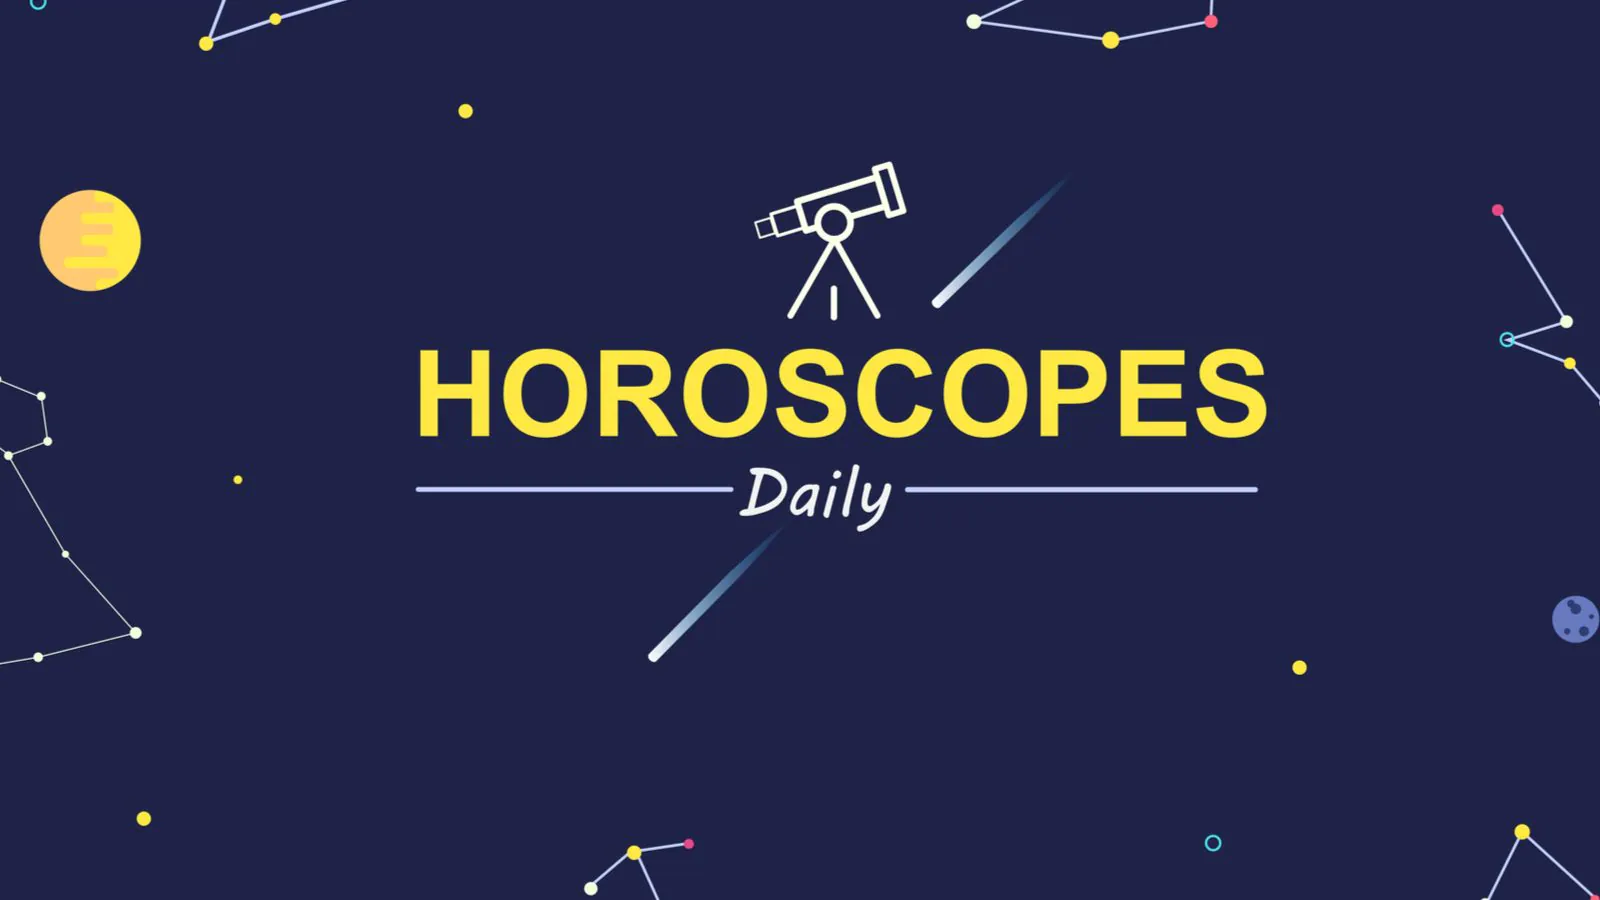 Check Out Daily Astrological Prediction for Aries, Taurus, Libra, Sagittarius And Other Zodiac Signs for Thursday